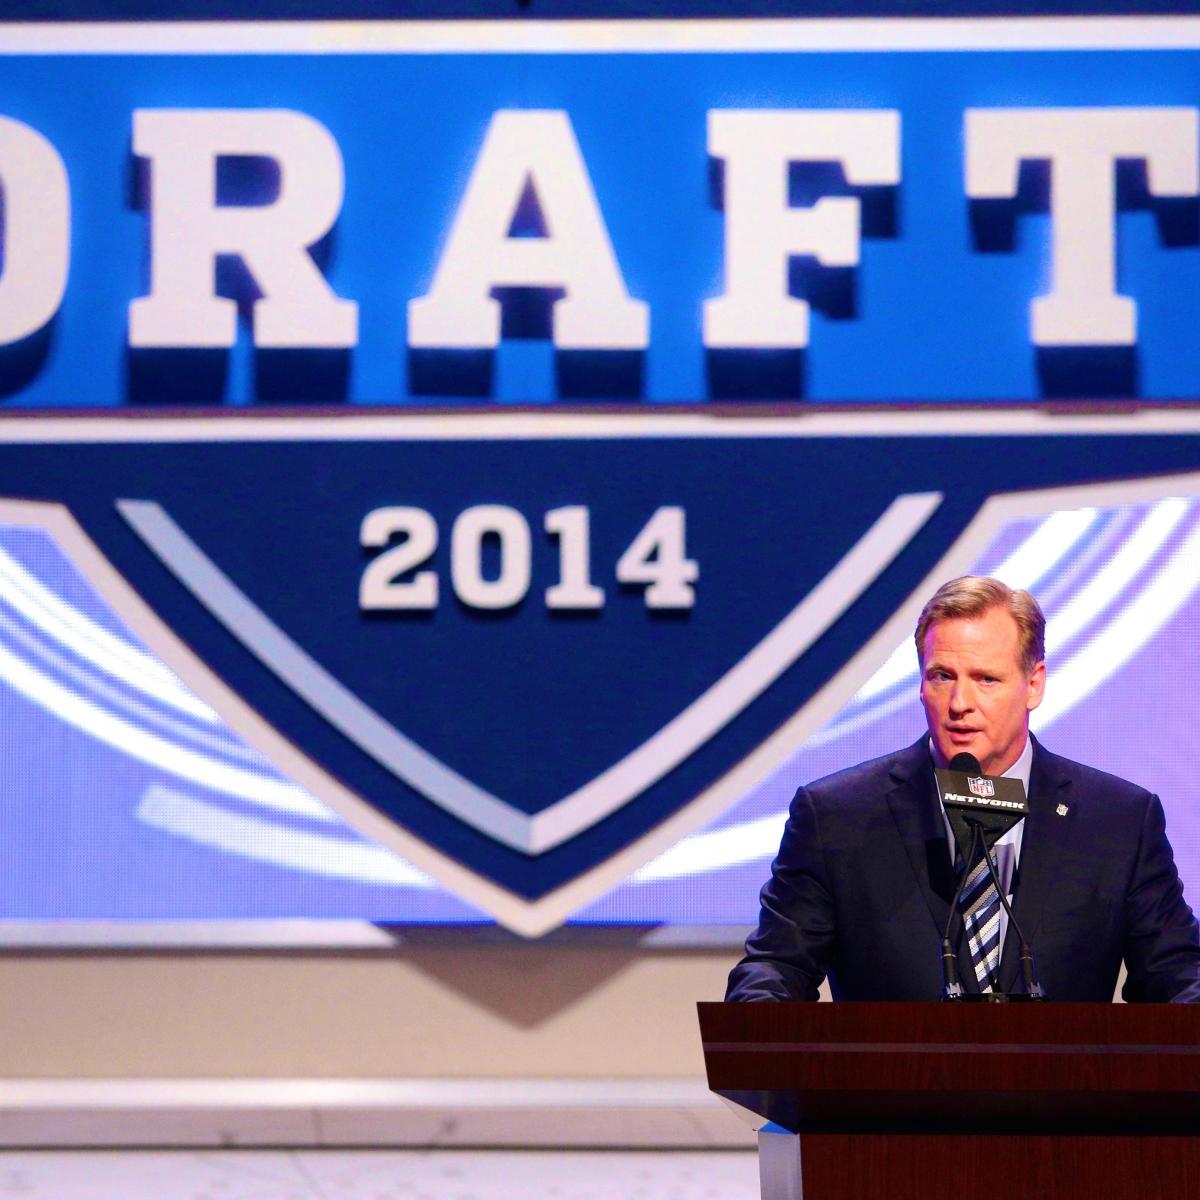 2014 NFL DRAFT ORDER: Houston Texans hold first pick, Dallas Cowboys in a  coin flip for Sweet #16